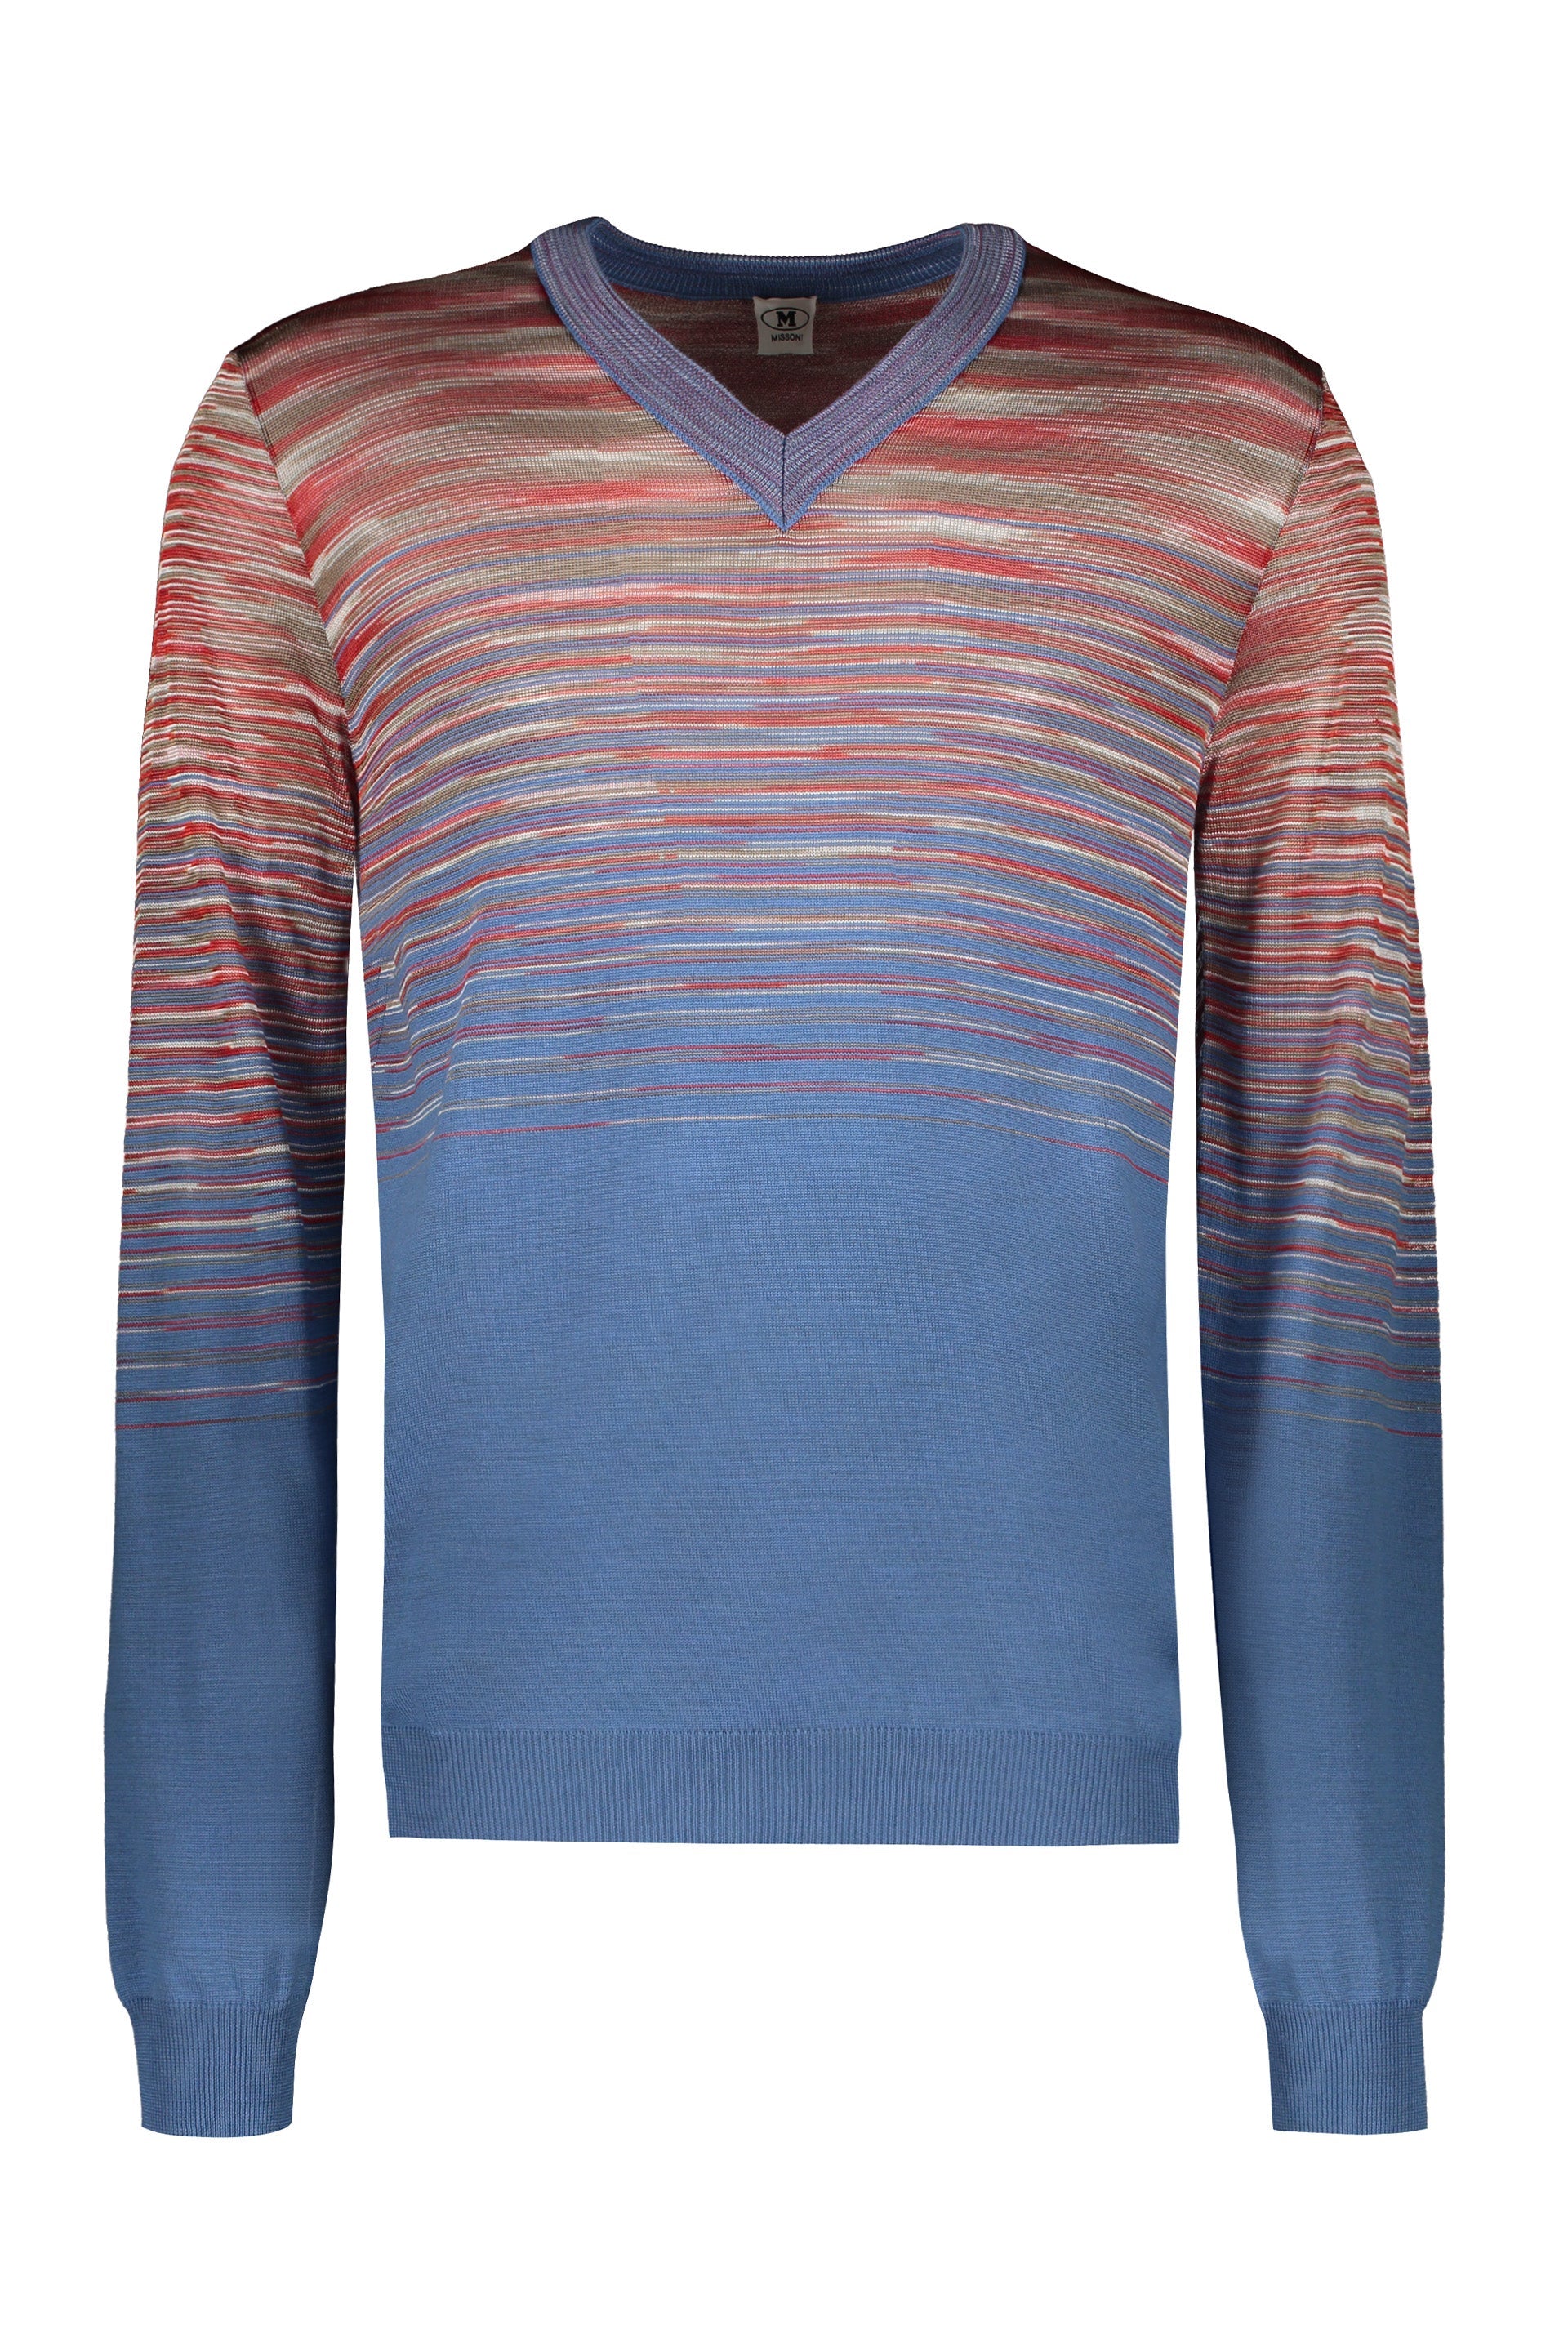 Missoni-OUTLET-SALE-Wool-V-neck-sweater-Strick-L-ARCHIVE-COLLECTION_47c77a2a-fdf5-486a-a216-bf780bc7ade3.jpg